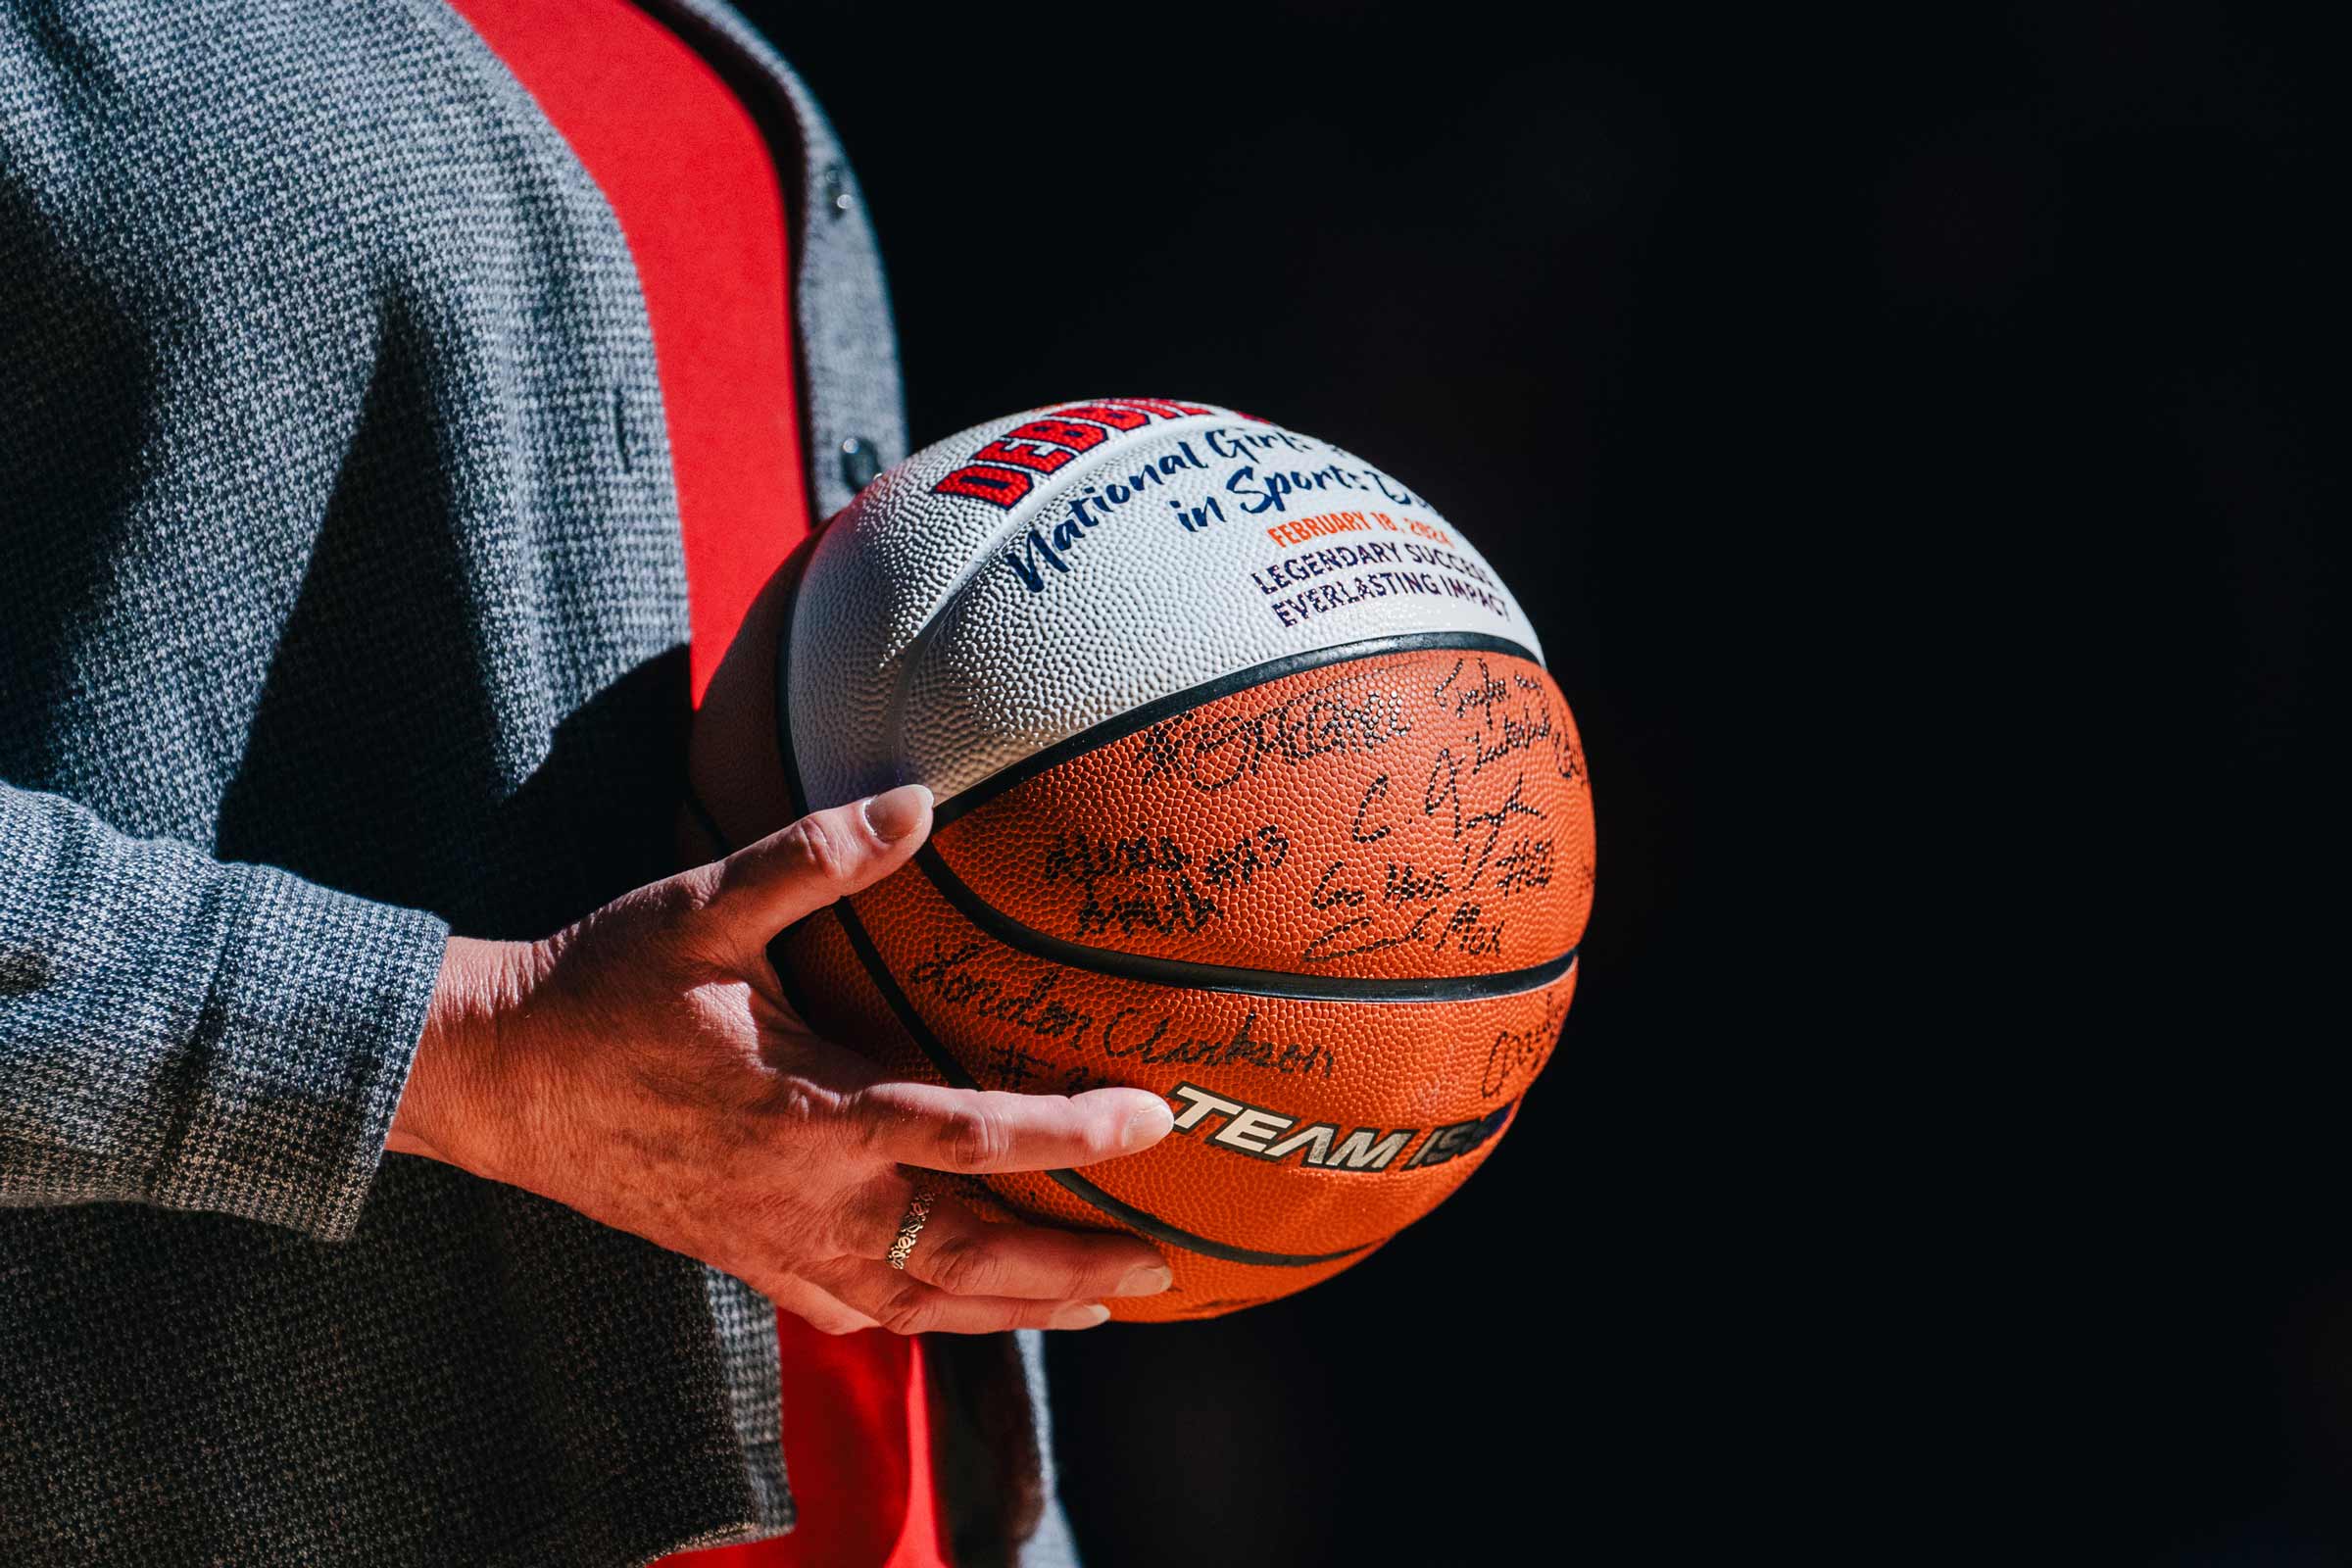 A basketball with signatures all over it